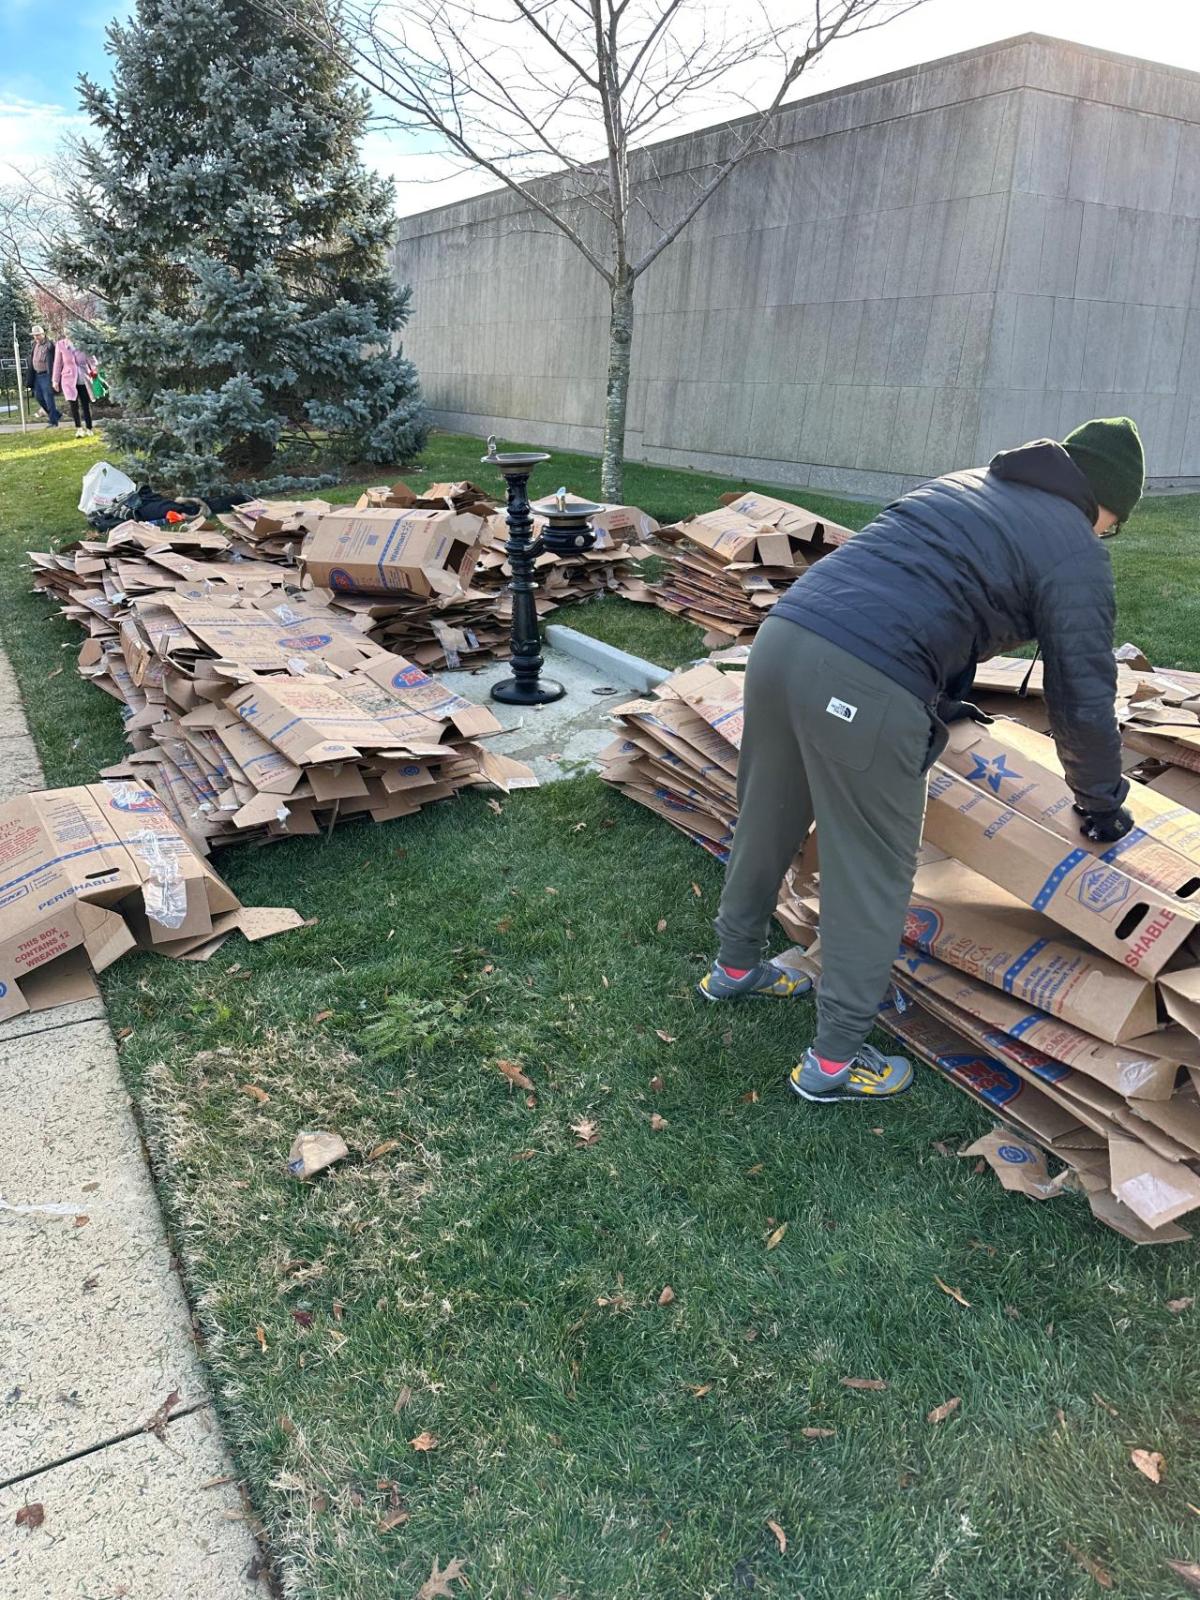 collapsed boxes